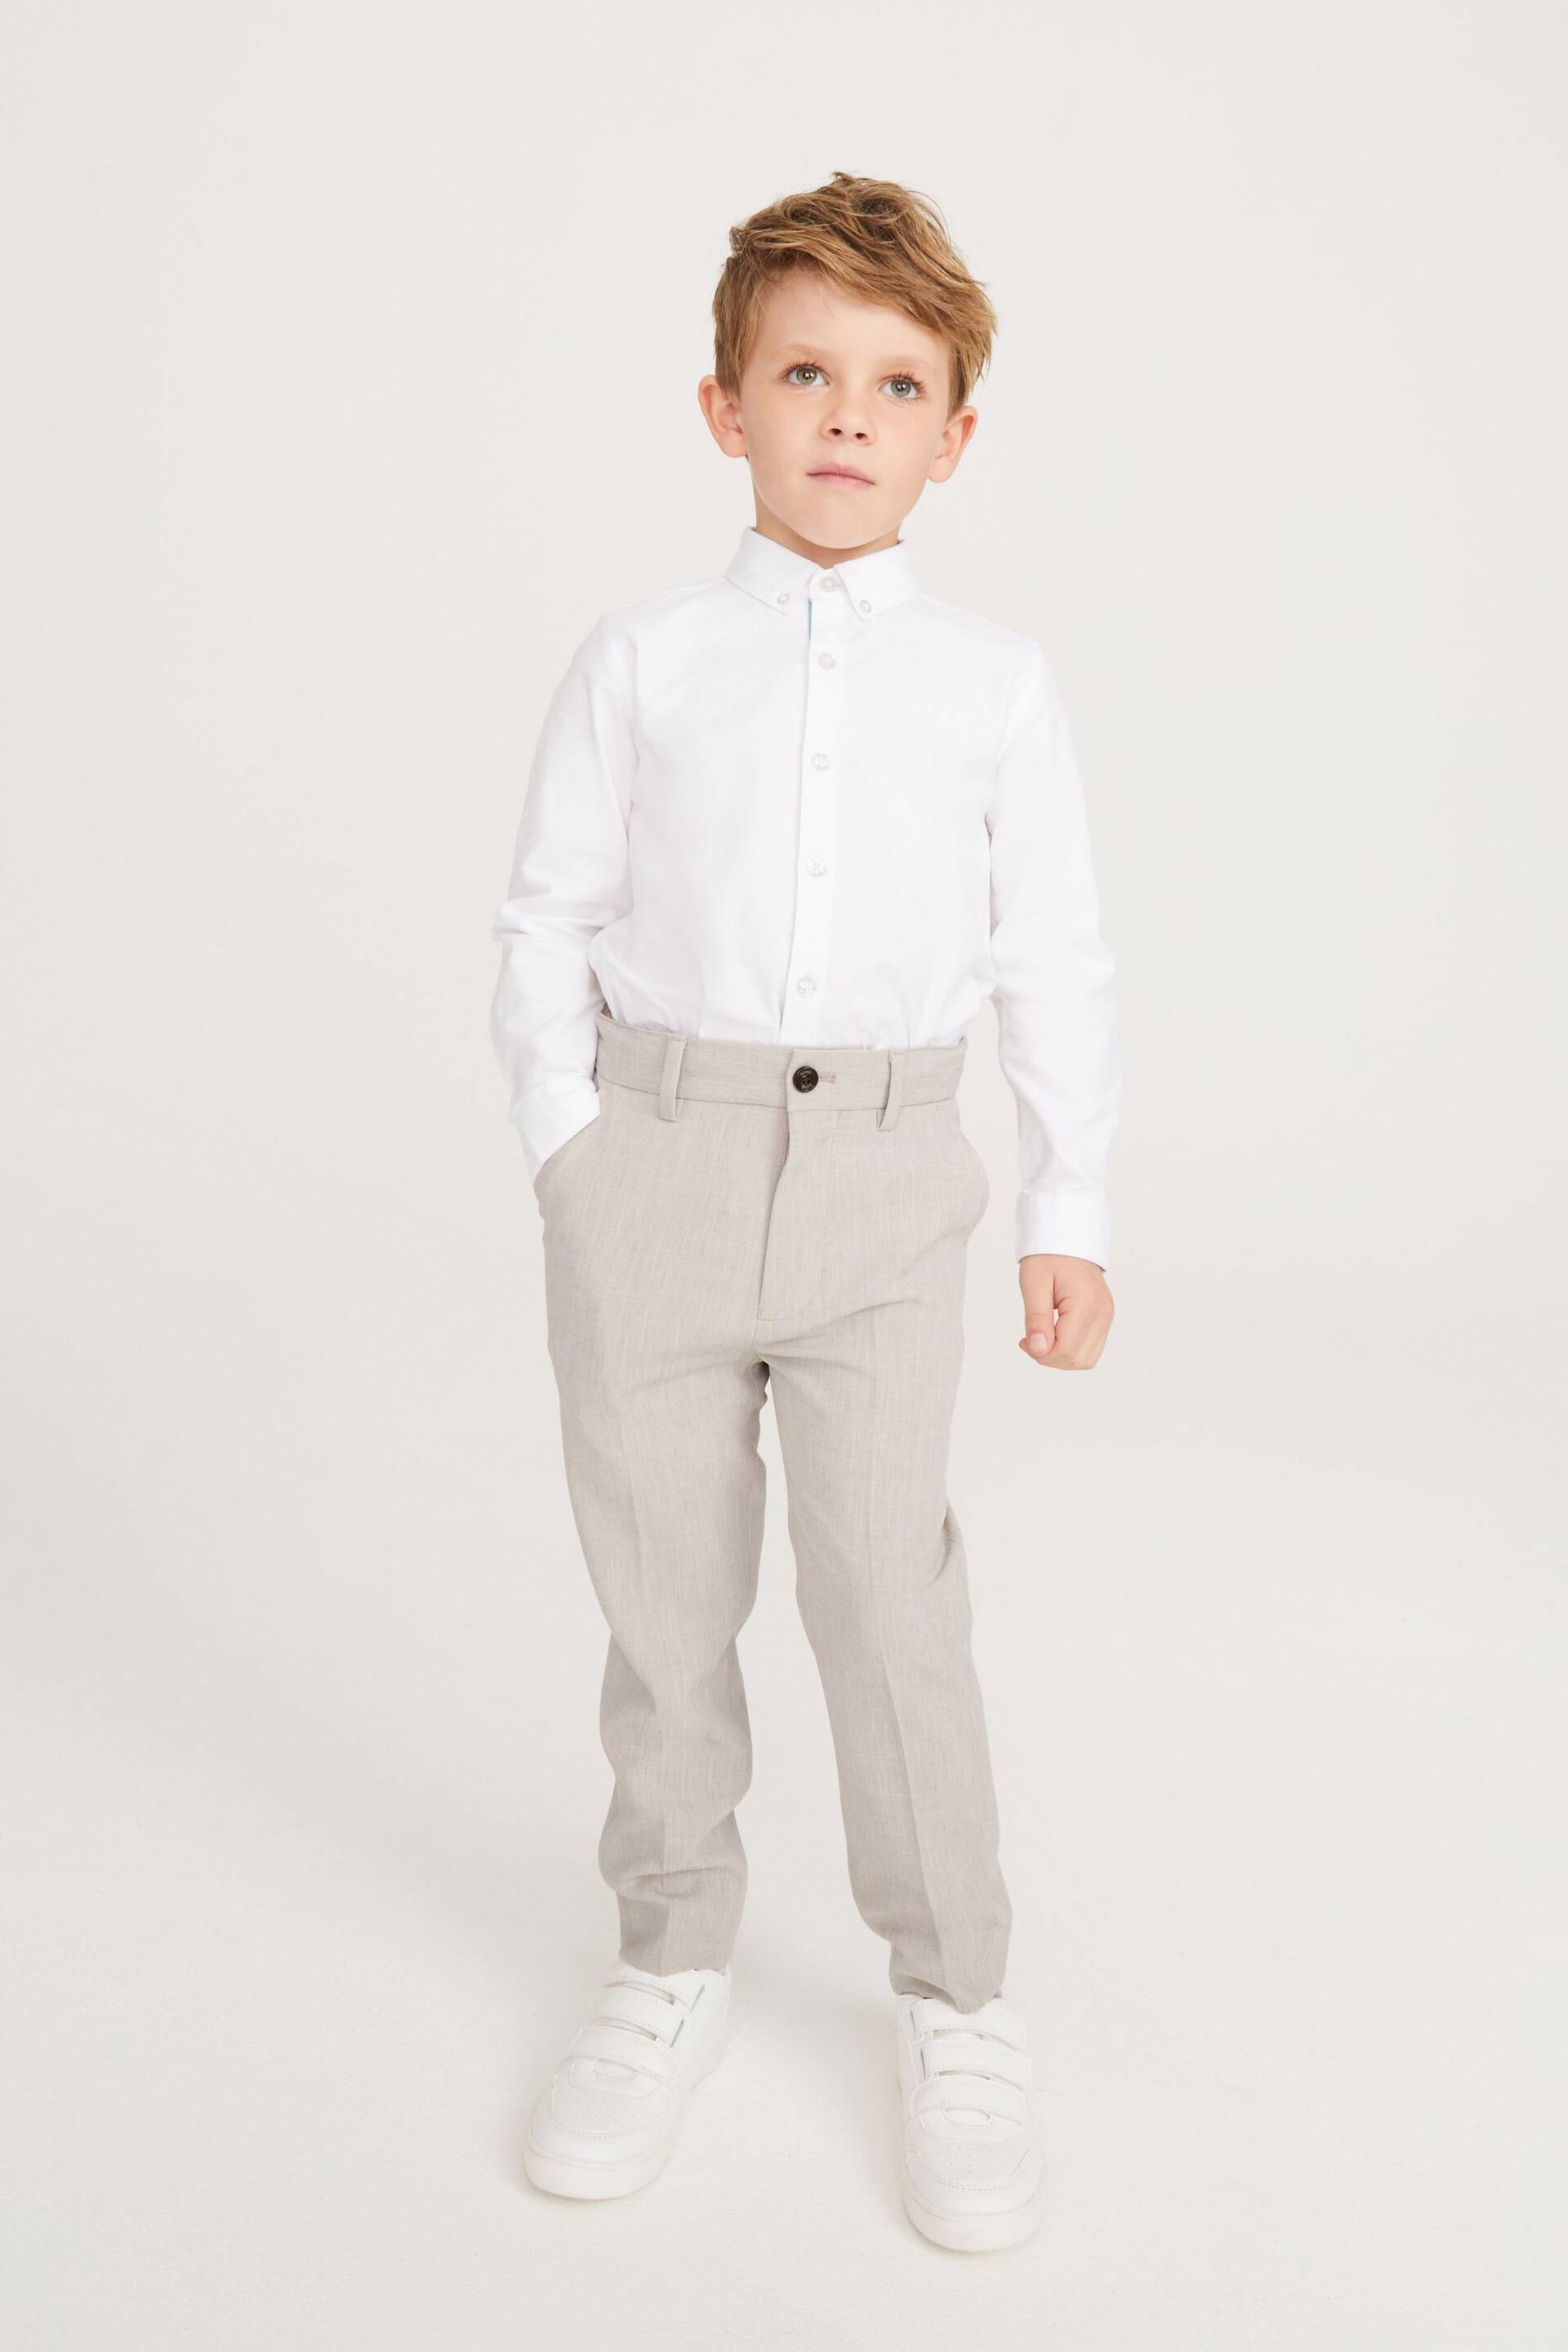 Baker by Ted Baker Suit Trousers - Image 1 of 6